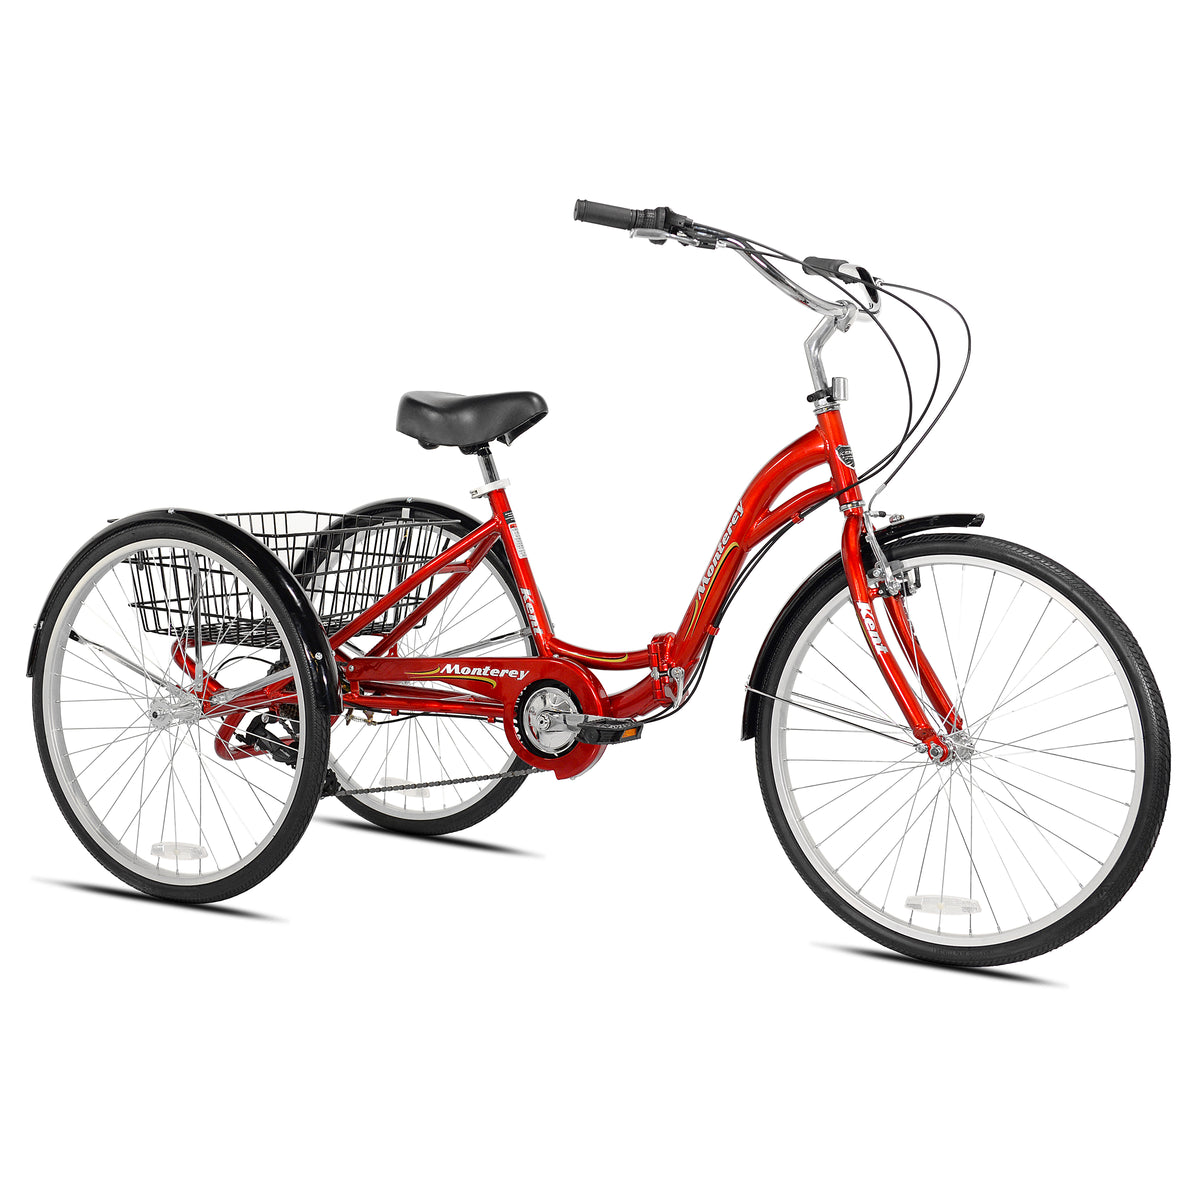 26" Kent Monterey | Folding Tricycle for Adults Ages 13+